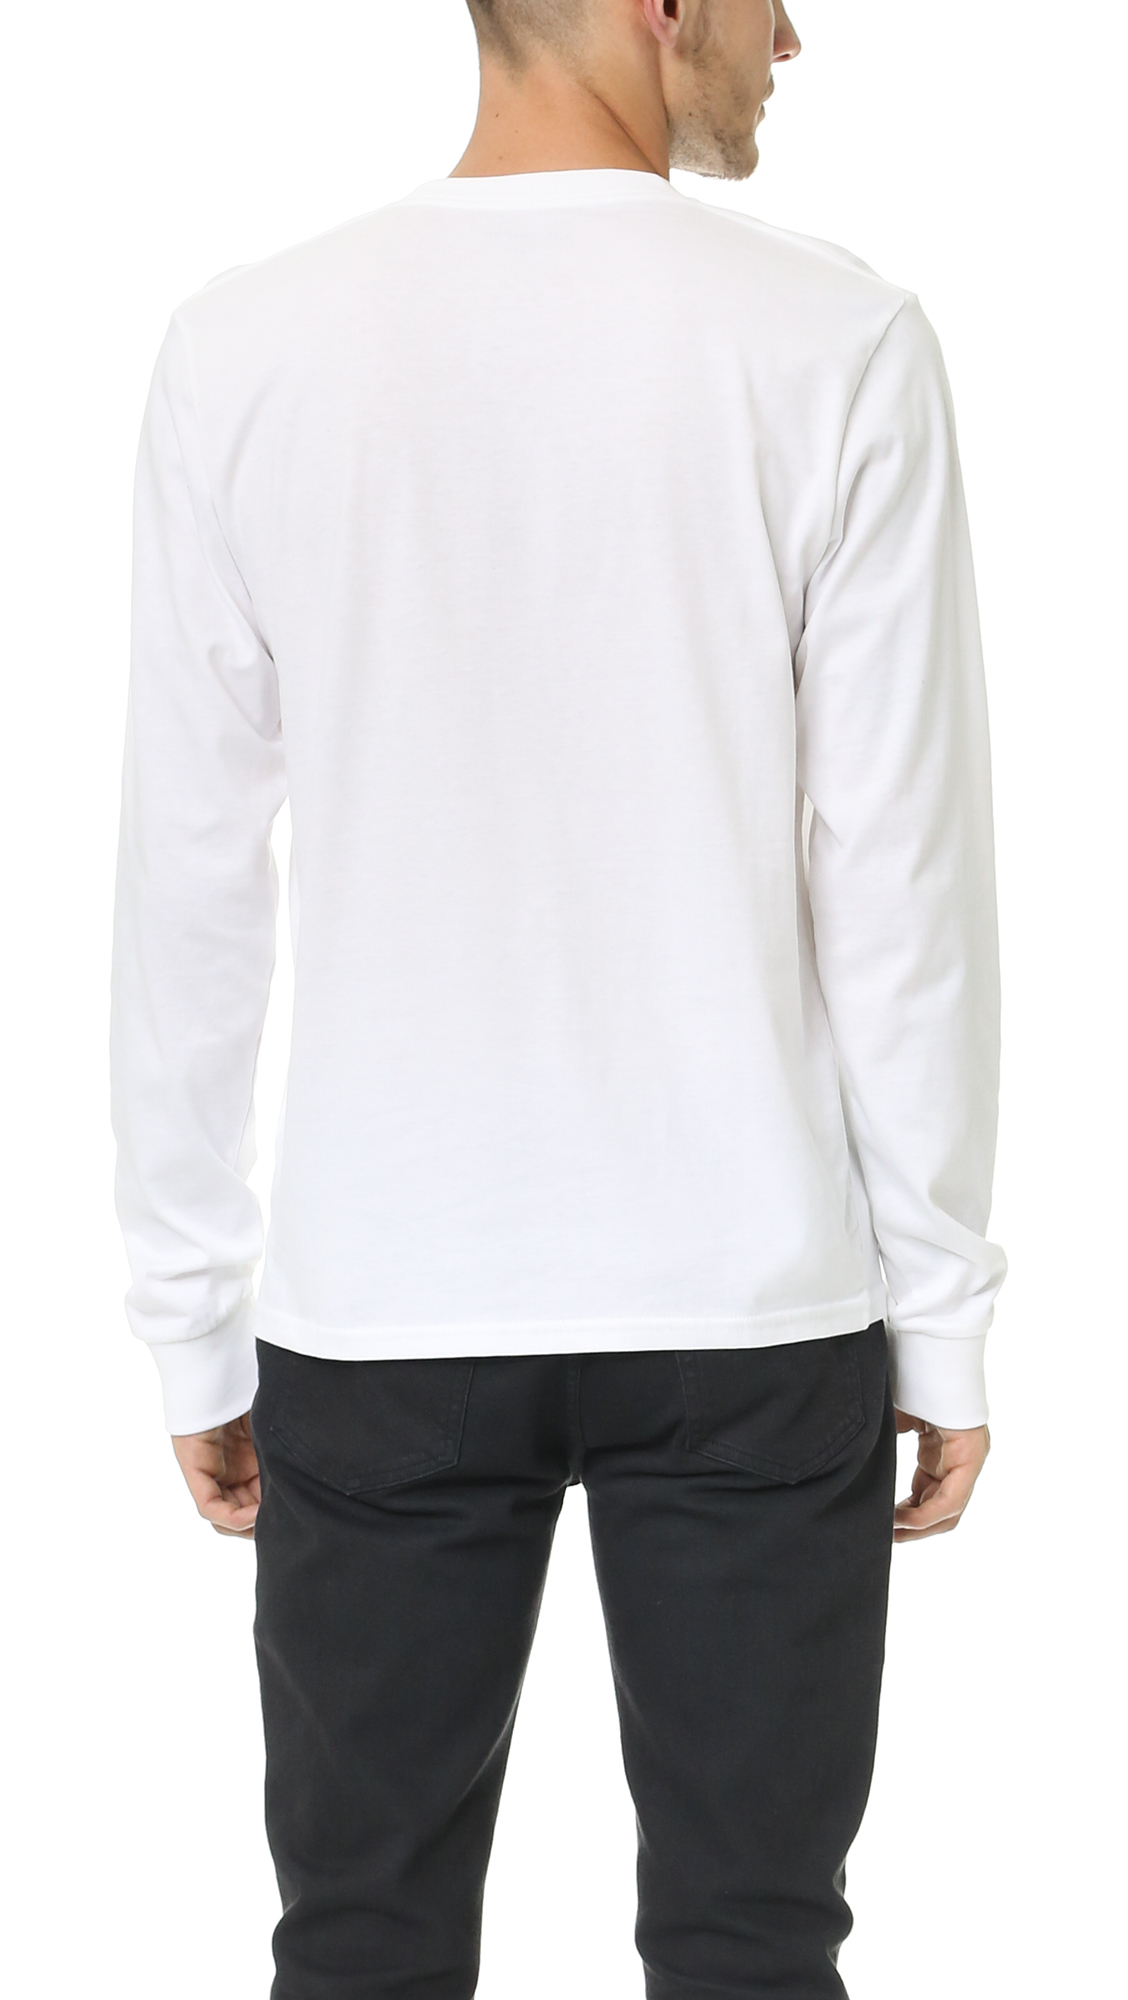 Carhartt WIP Cotton Long Sleeve Pocket Tee in White for Men - Lyst